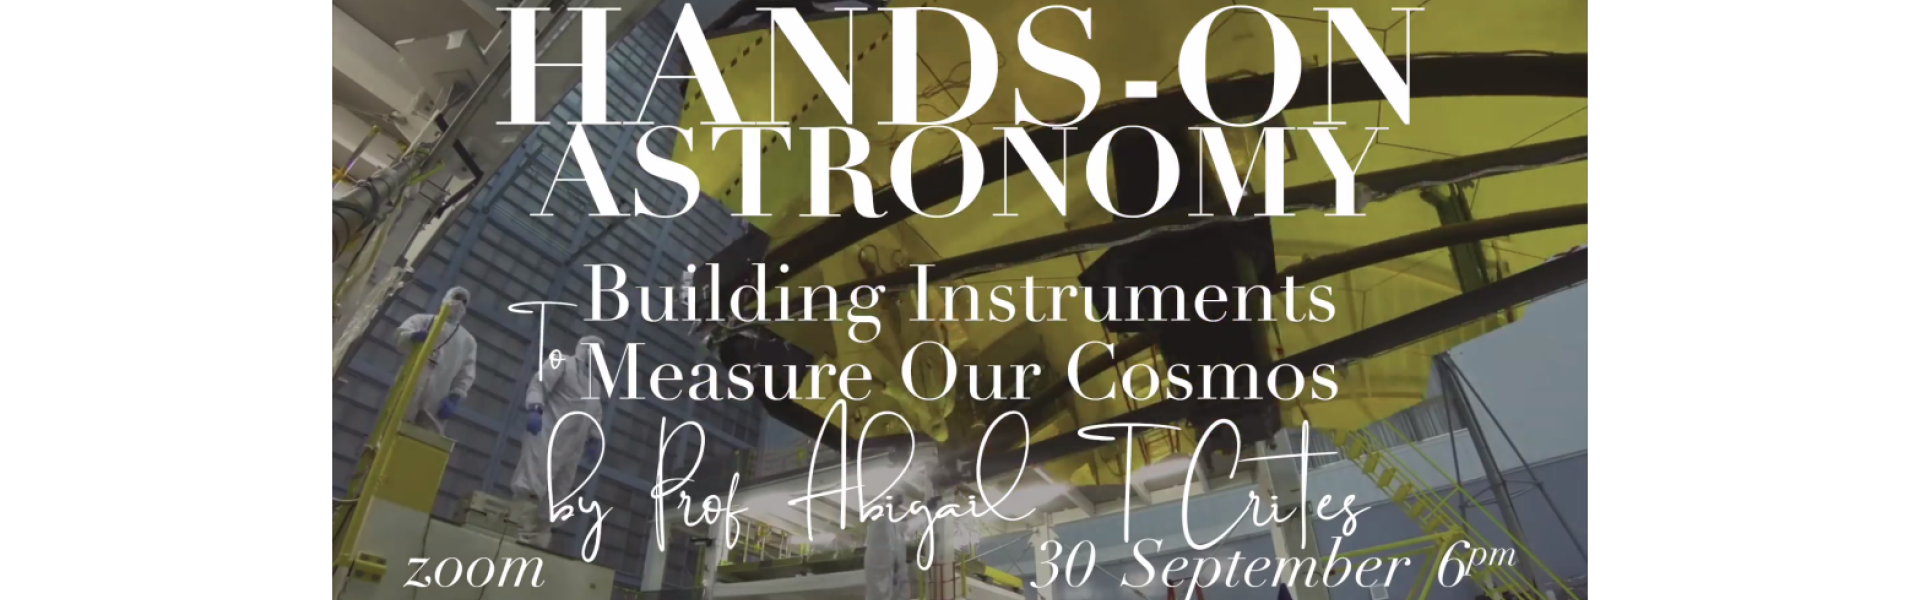 ASX - Hands-On Astronomy 